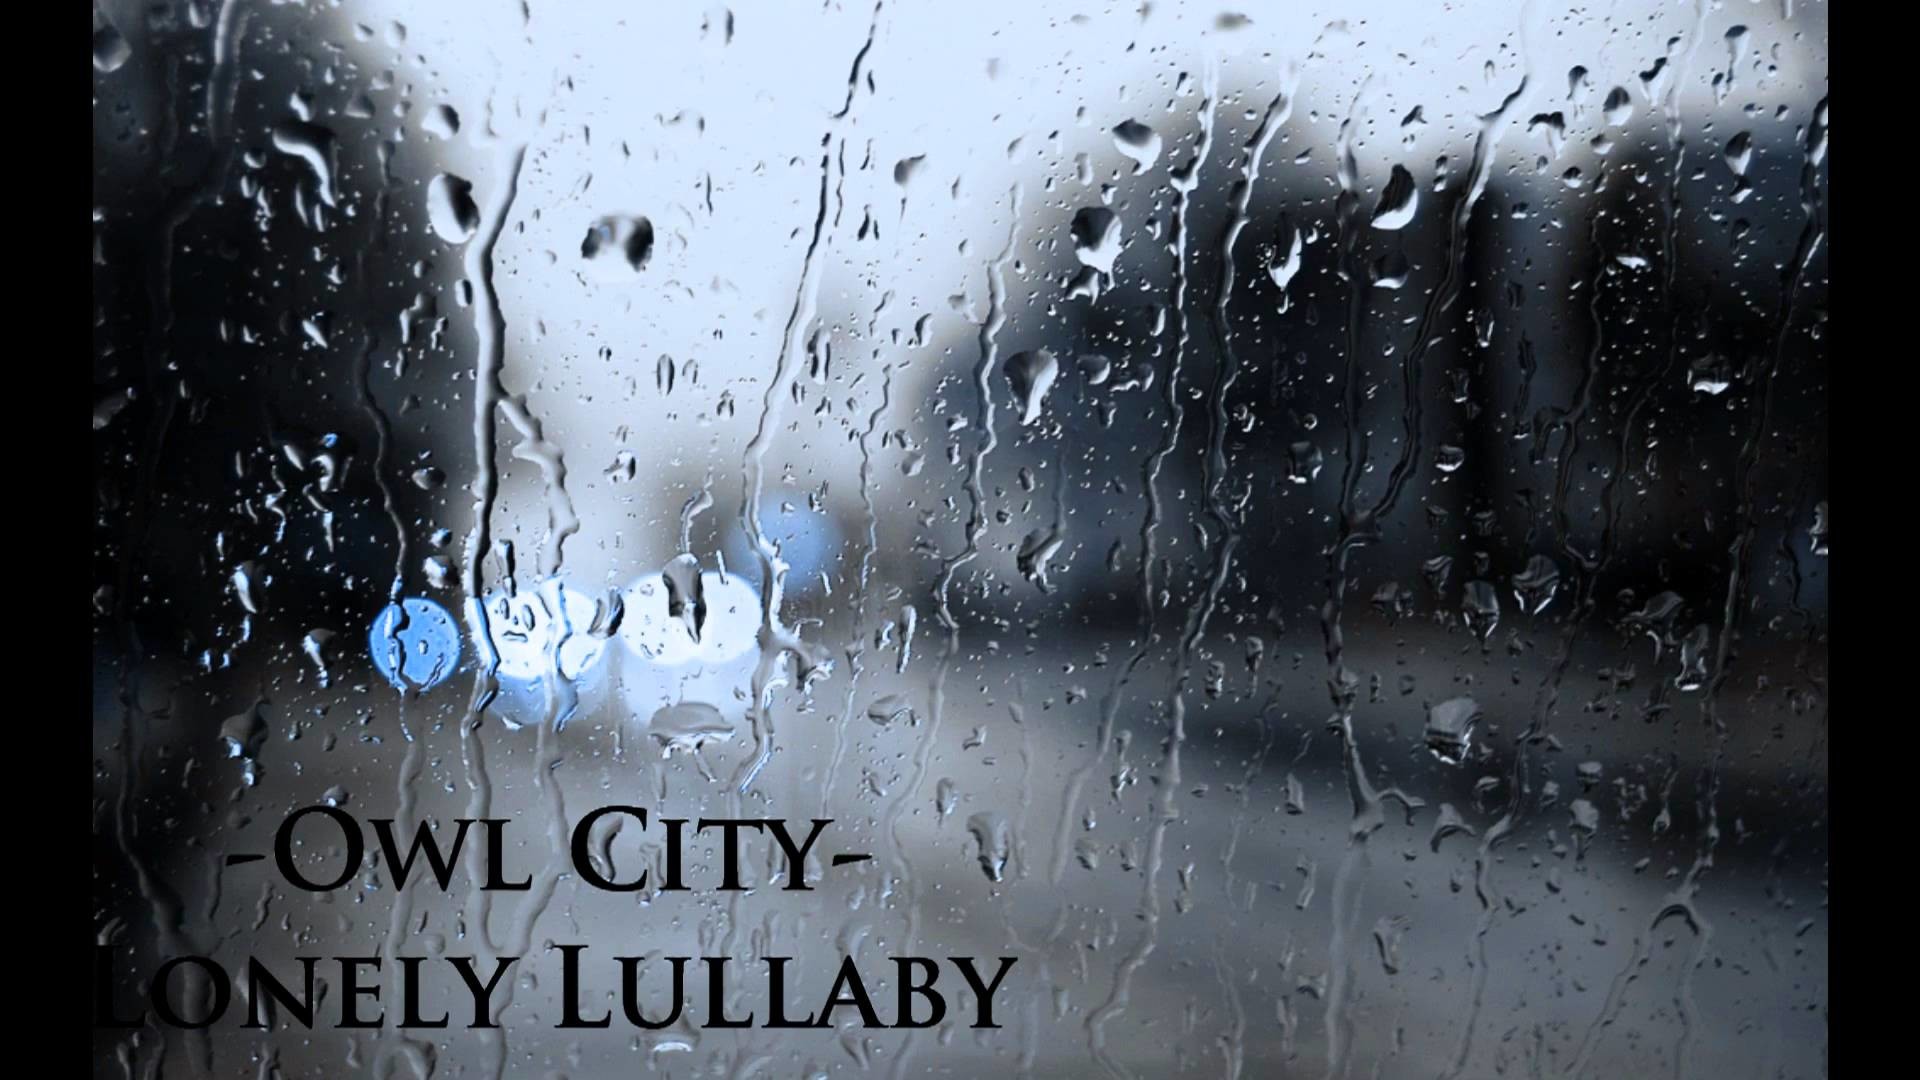 1920x1080 Owl City-Lonely Lullaby HD 1080p (2011)